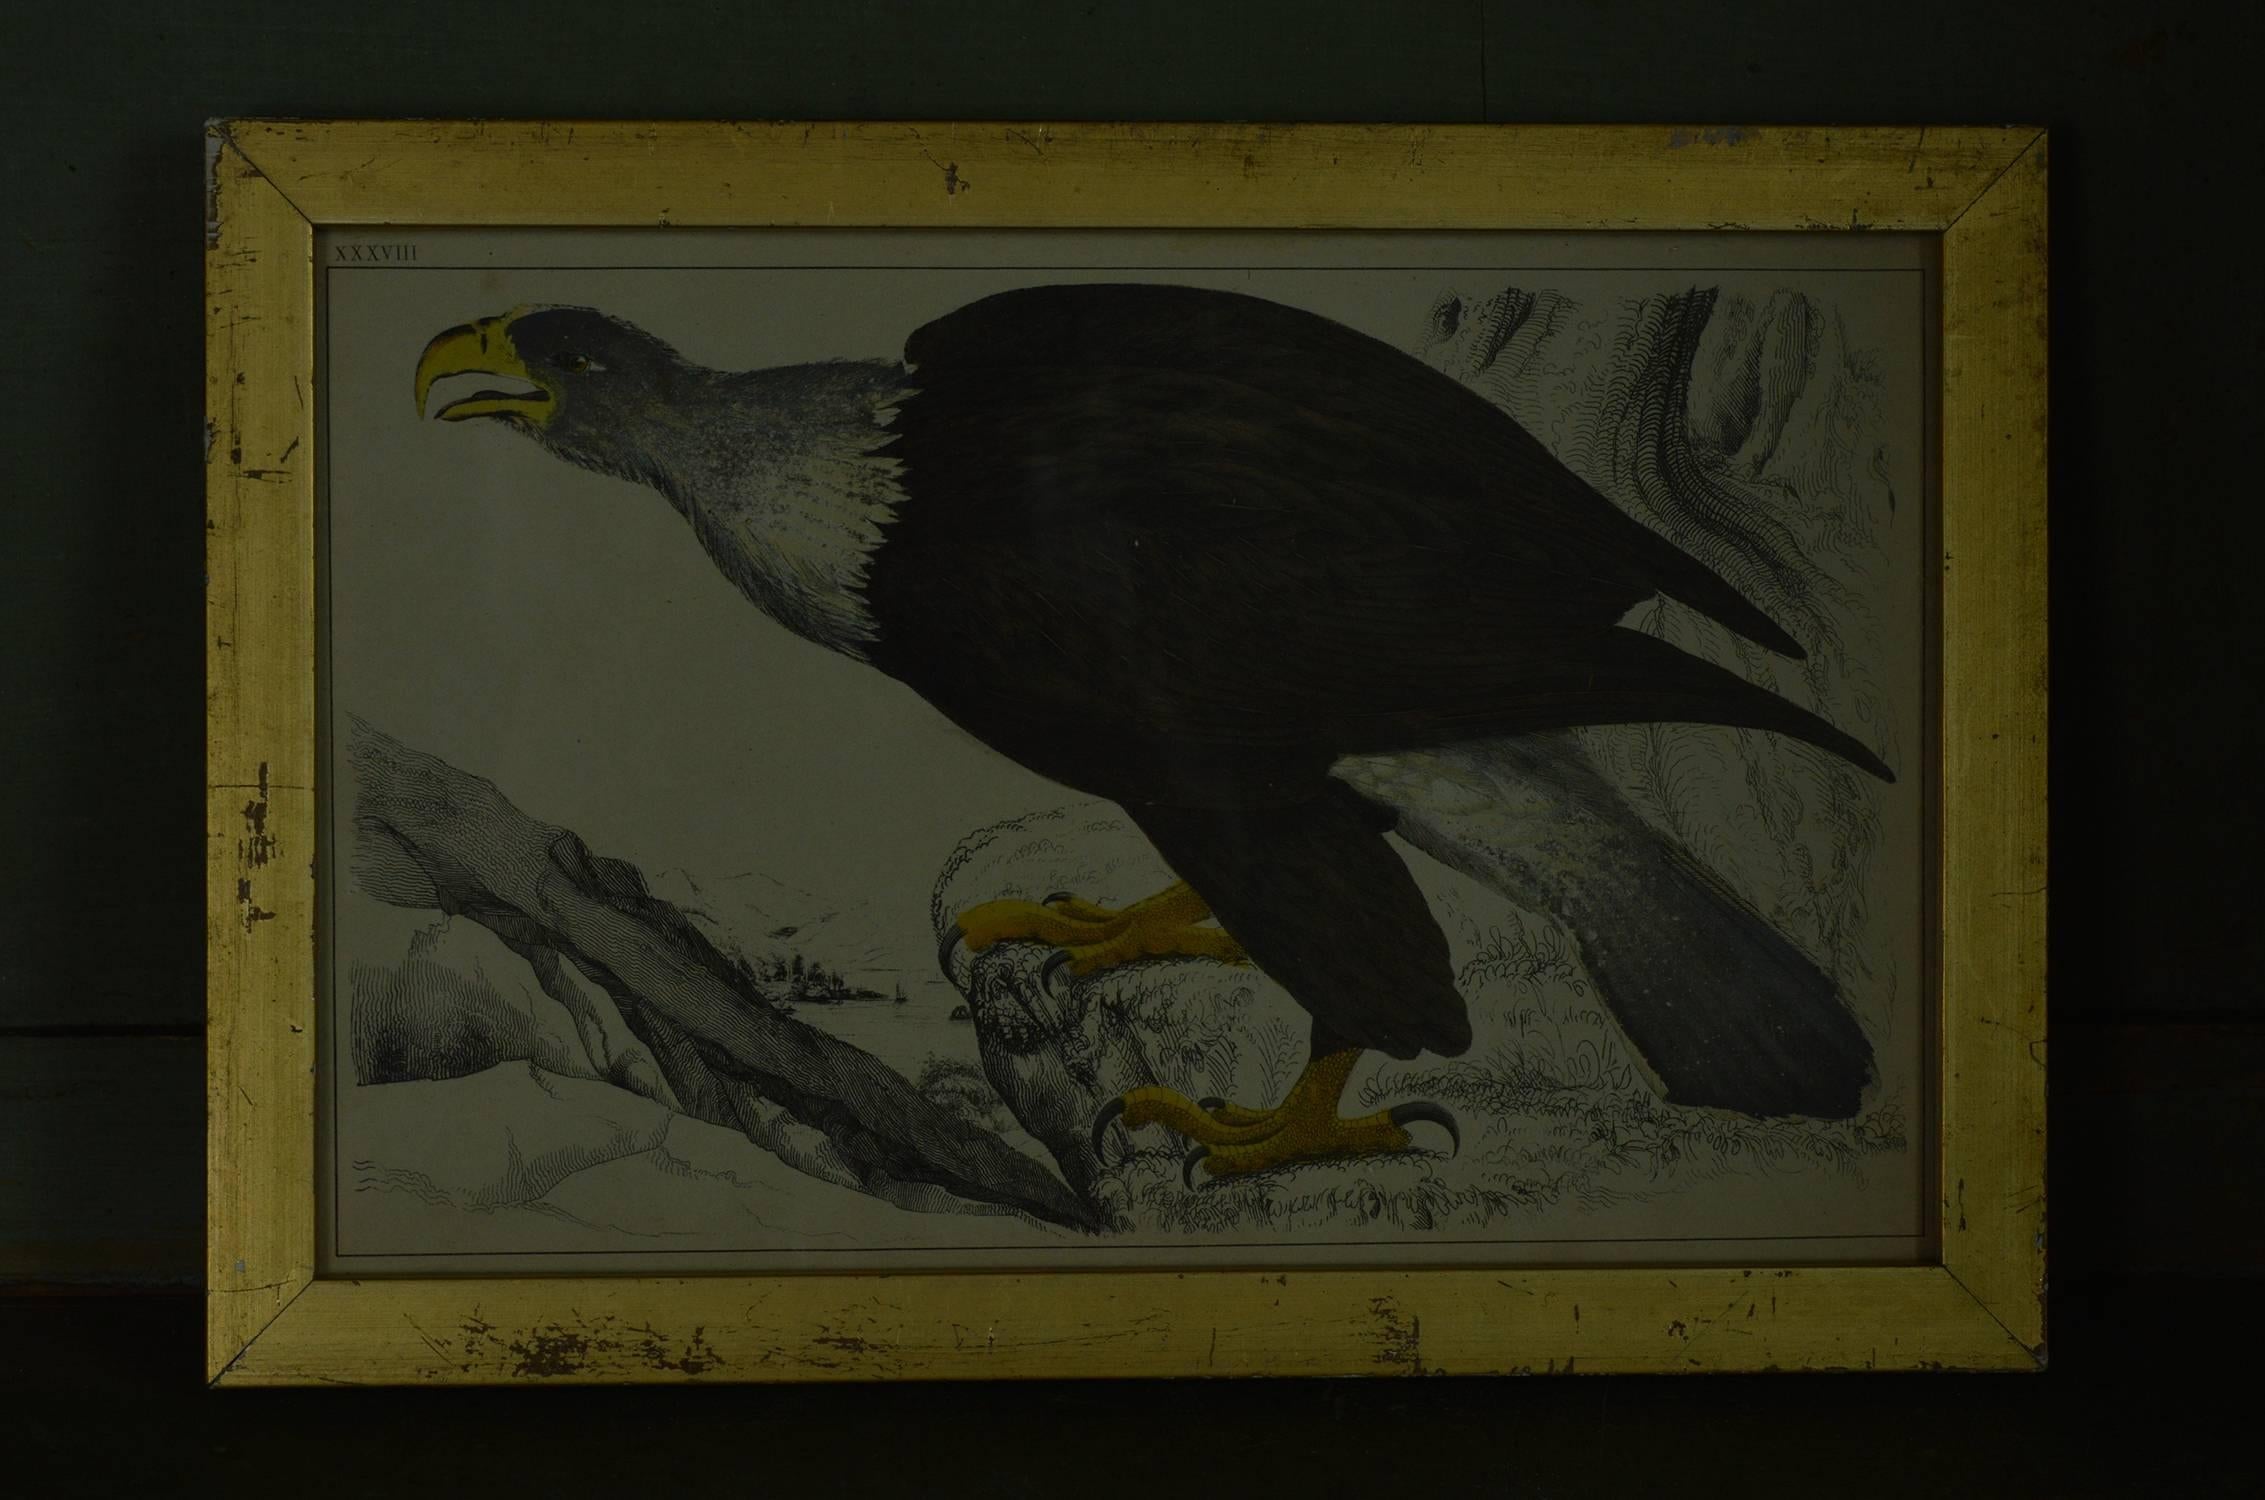 Other Original Antique Print of an Eagle, 1847